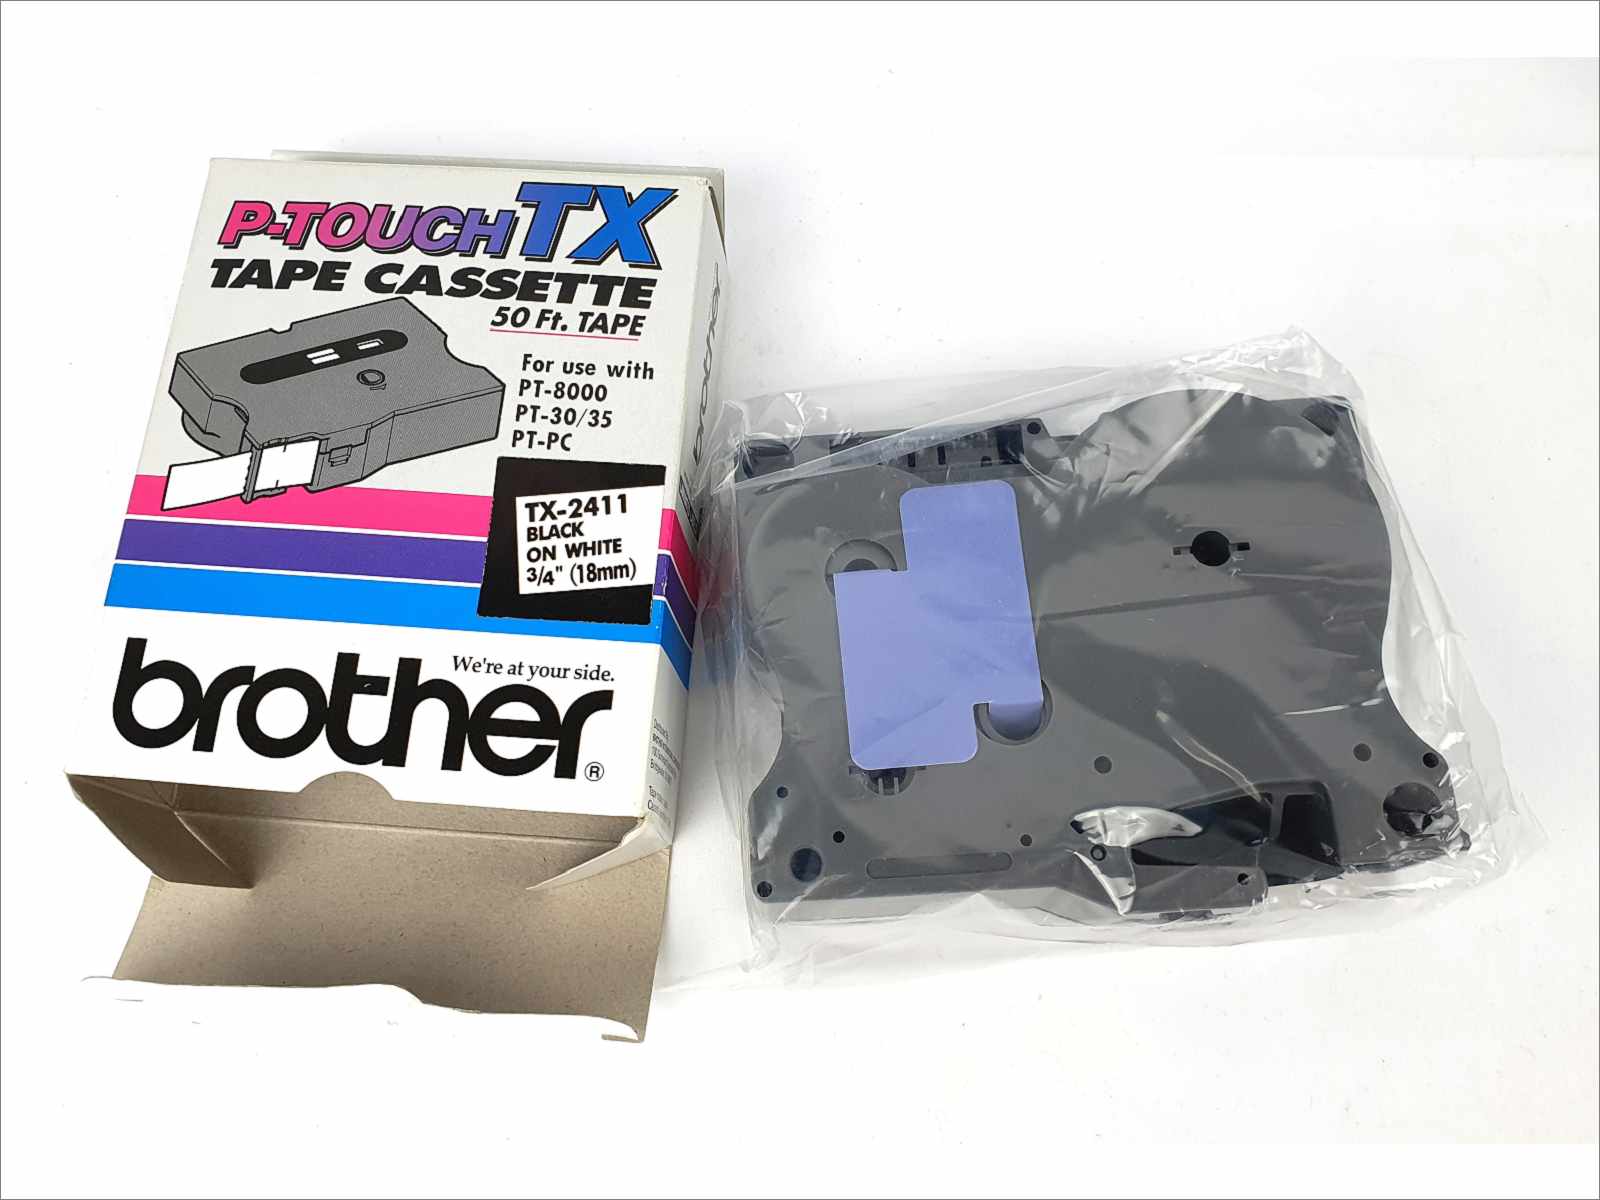 50' feet 18mm Brother P-Touch TX-2411 Tape Cassette Black on White 3/4” 